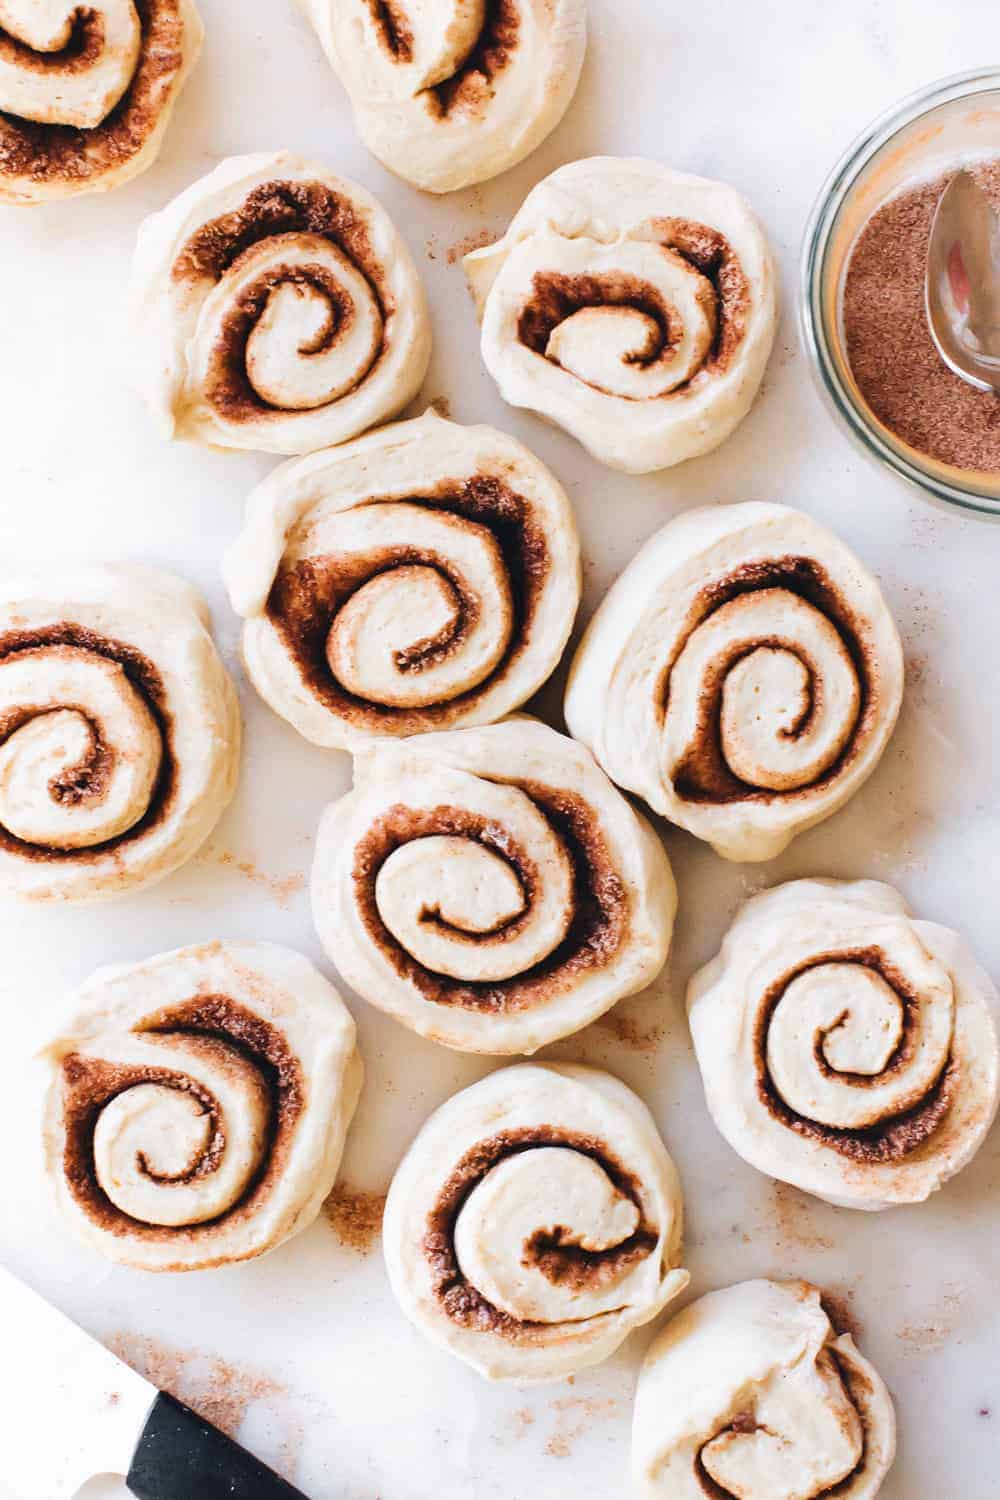 This Go-To-Dough makes the perfect cinnamon rolls. Easy and so delicious.